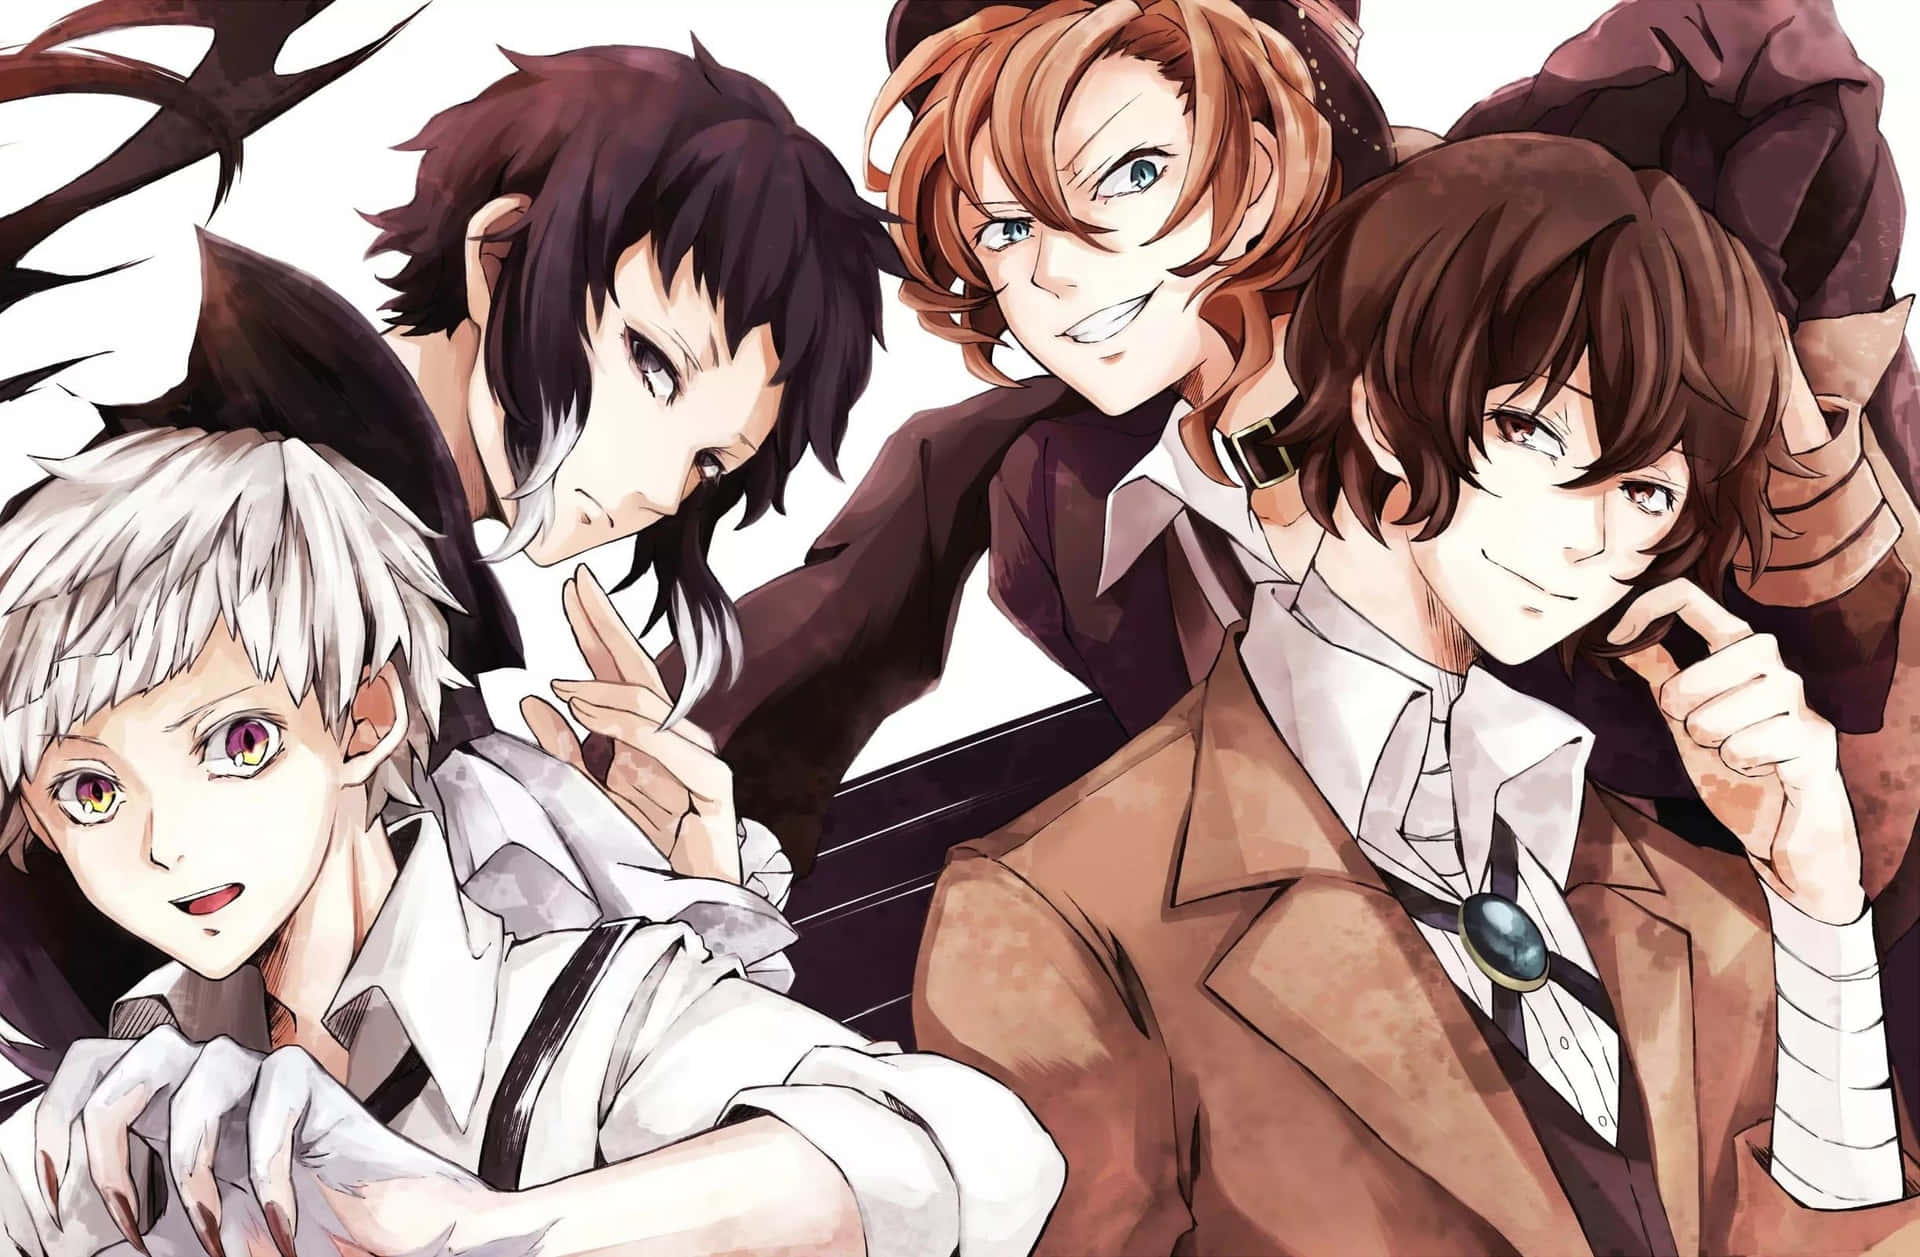 Take a stroll through the city of Yokohama as you explore the unforgettable street-smart adventures of Bungo Stray Dogs.